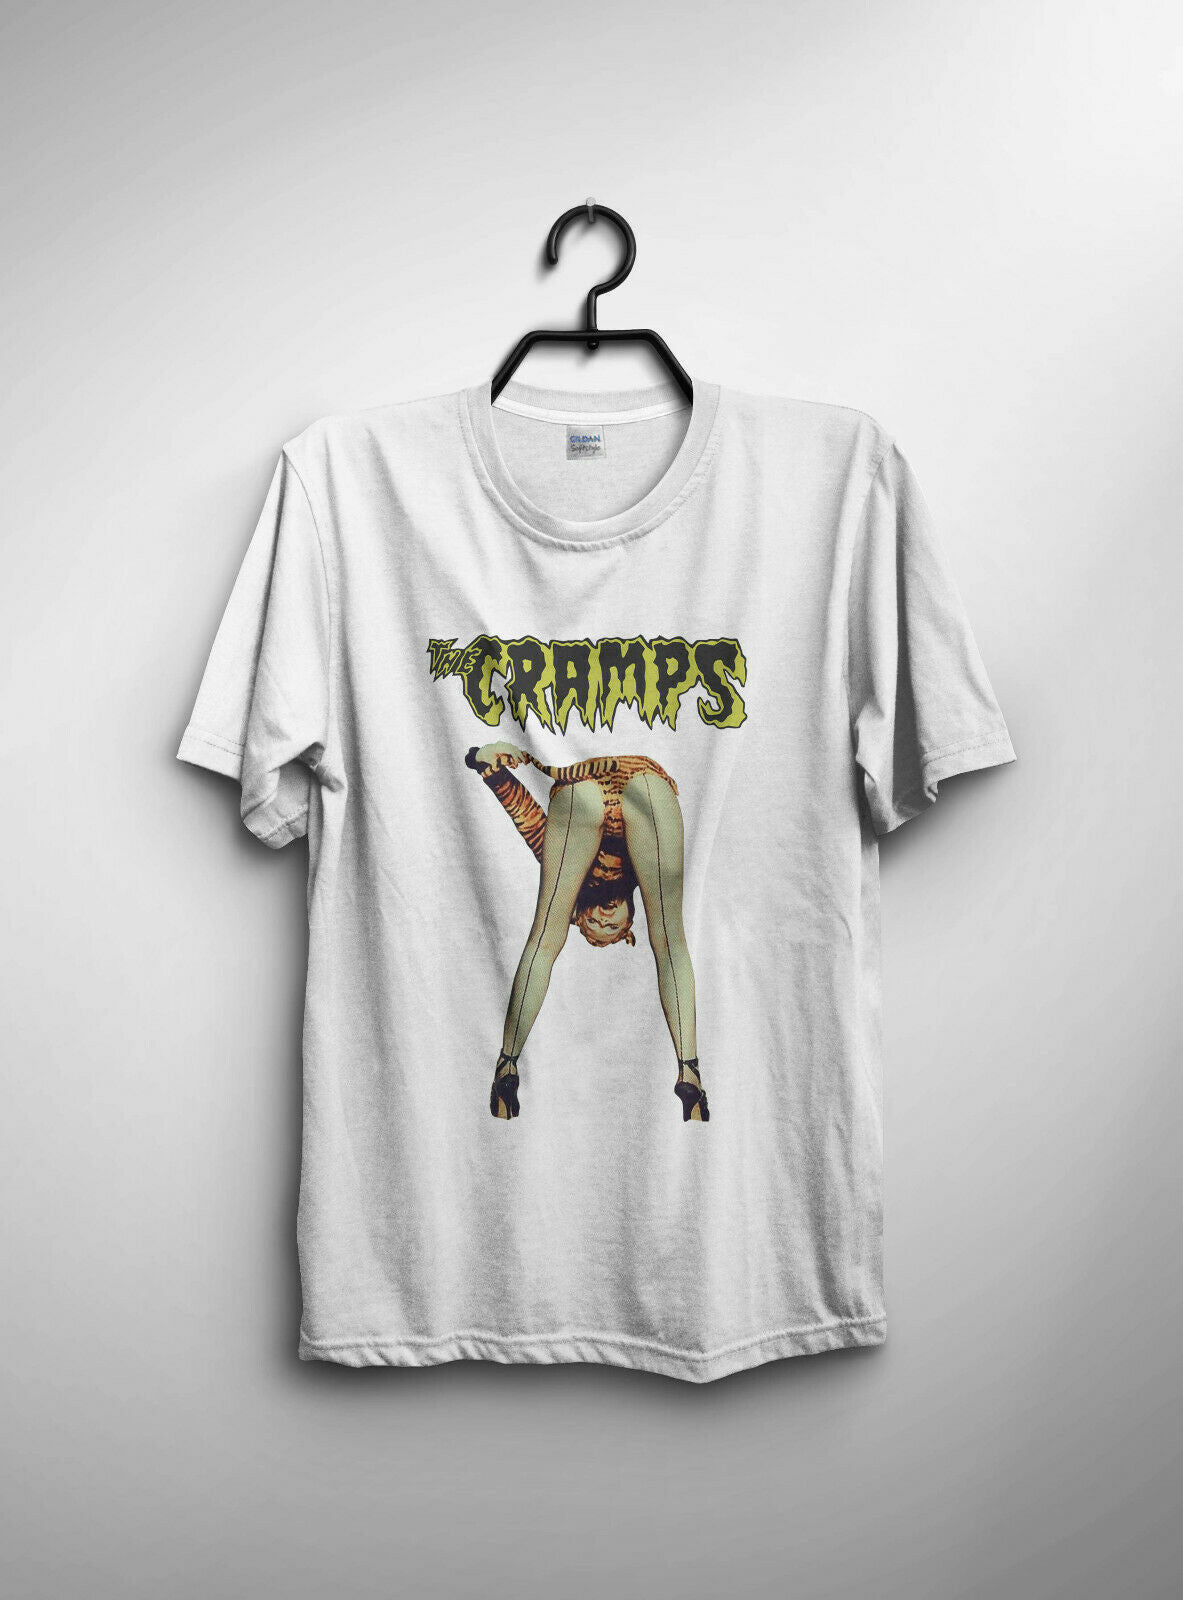 the cramps t shirt